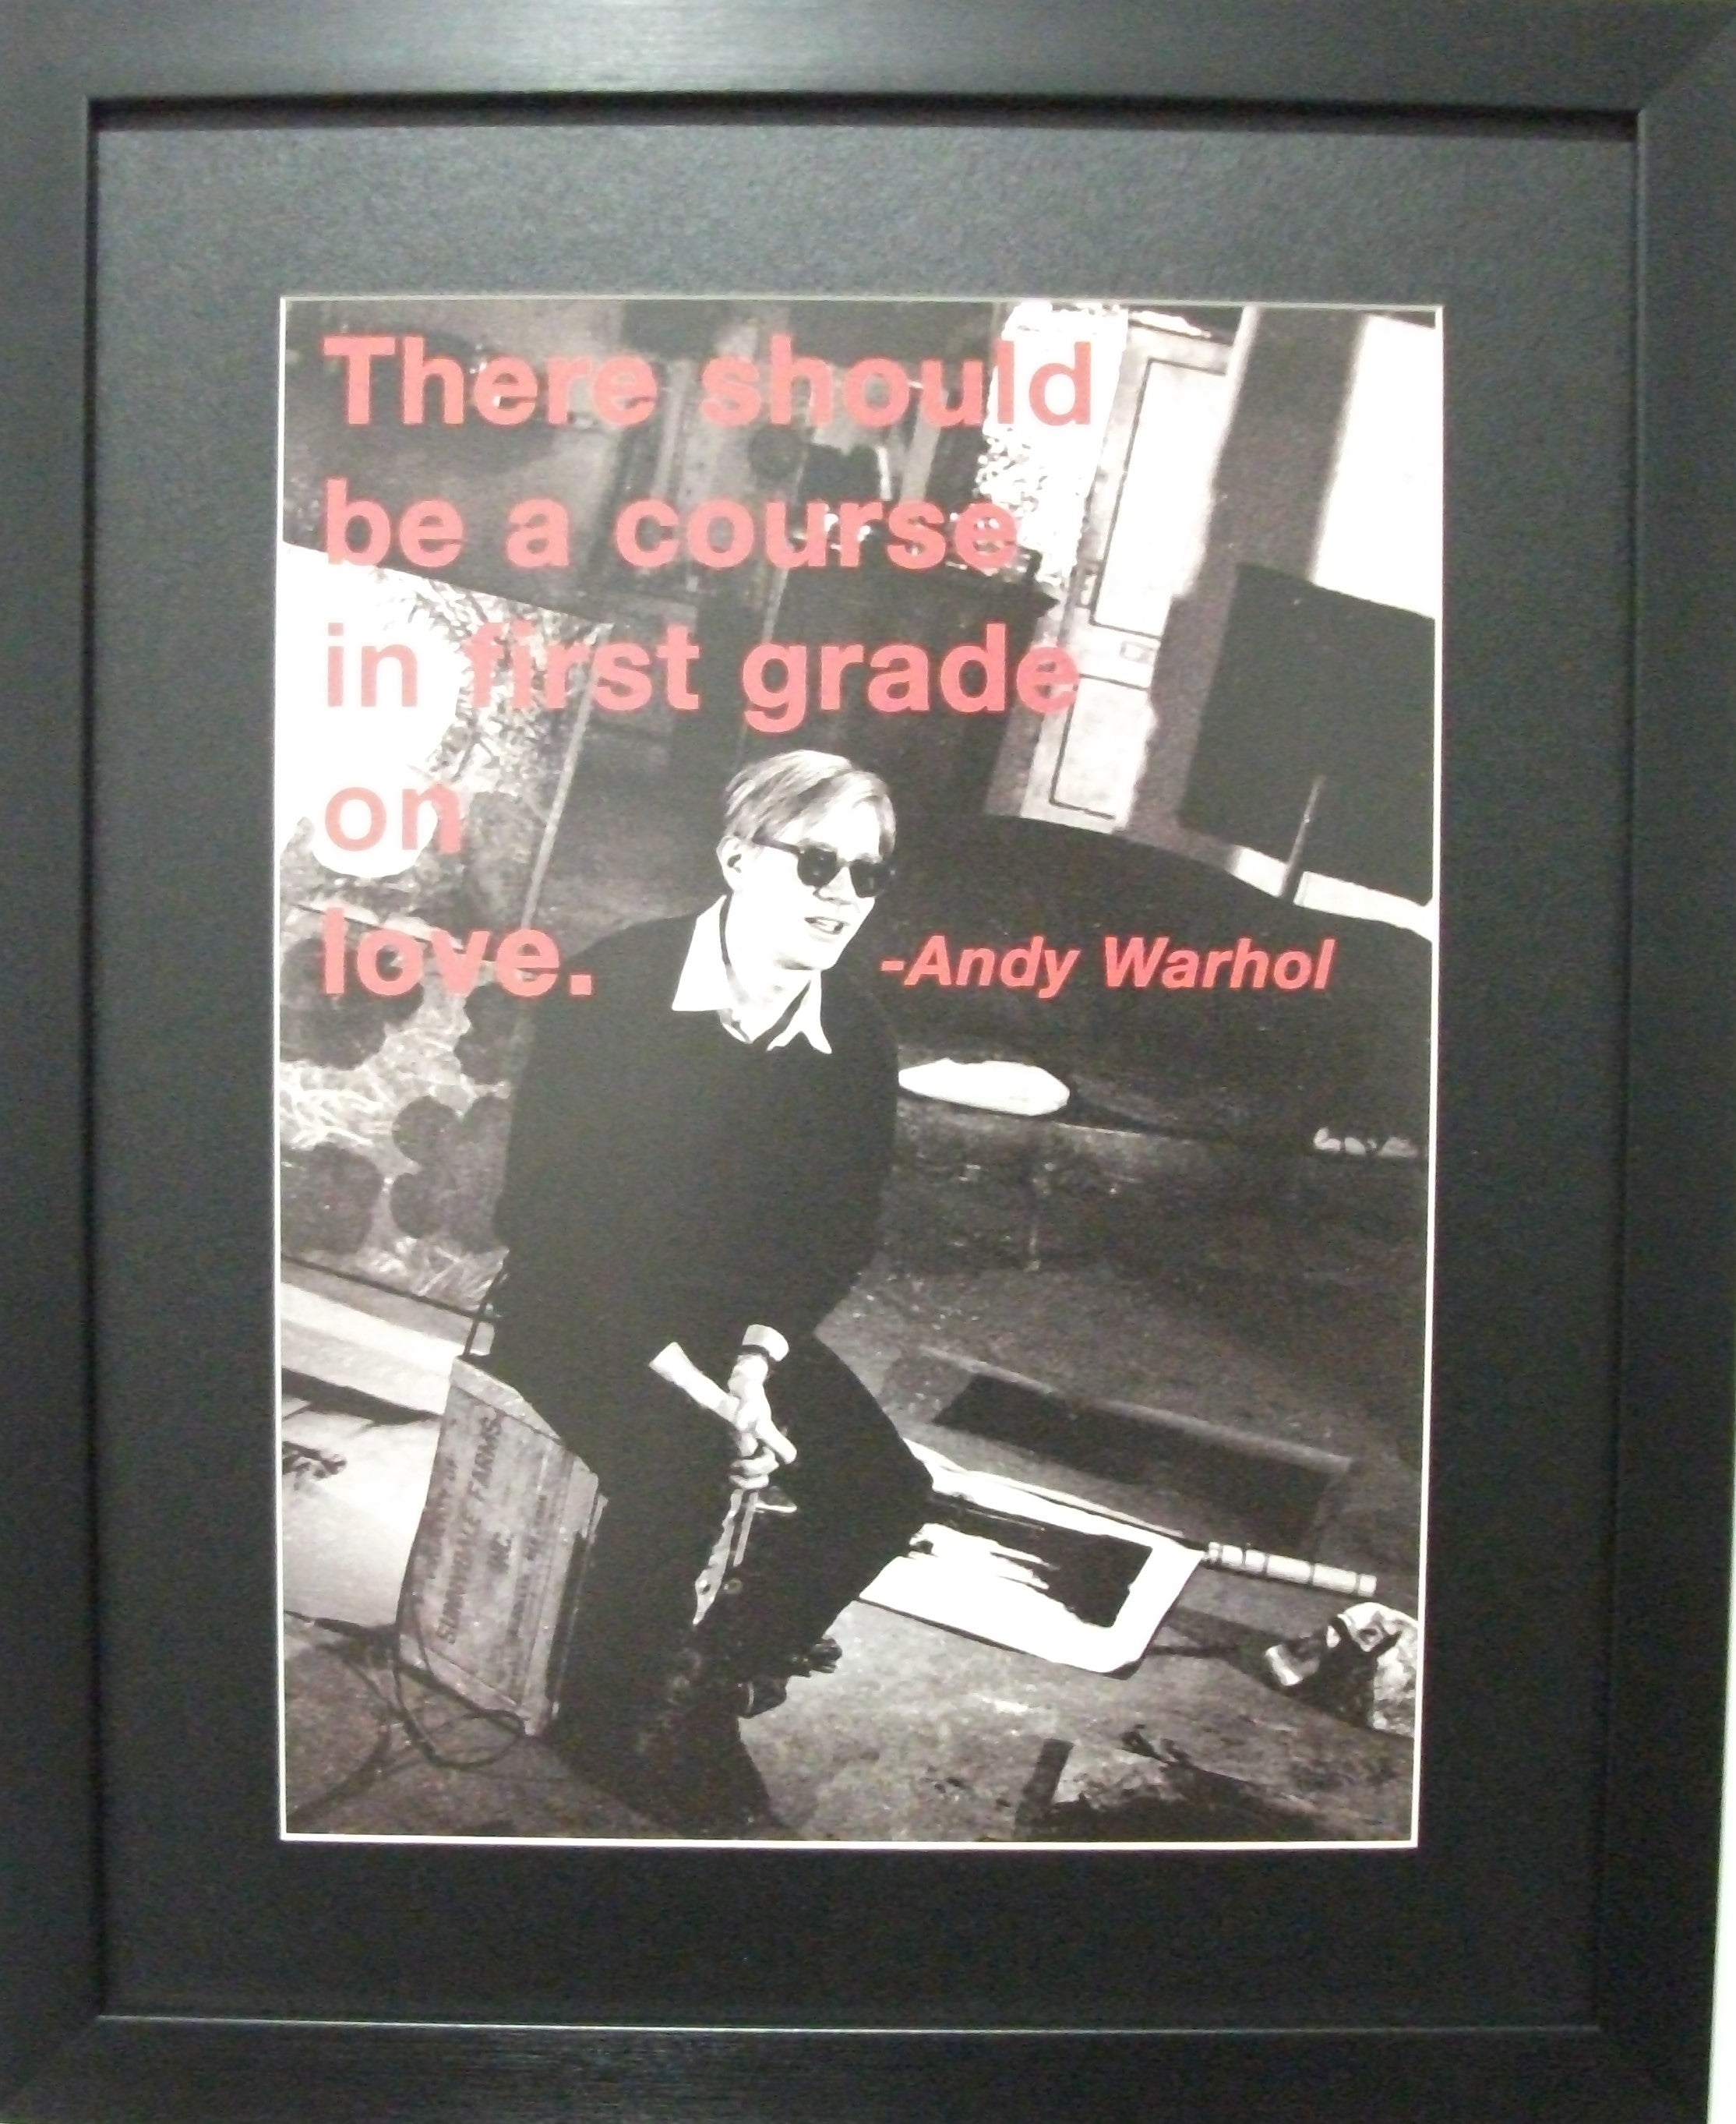 Andy Warhol-There should be a course in first grade on love